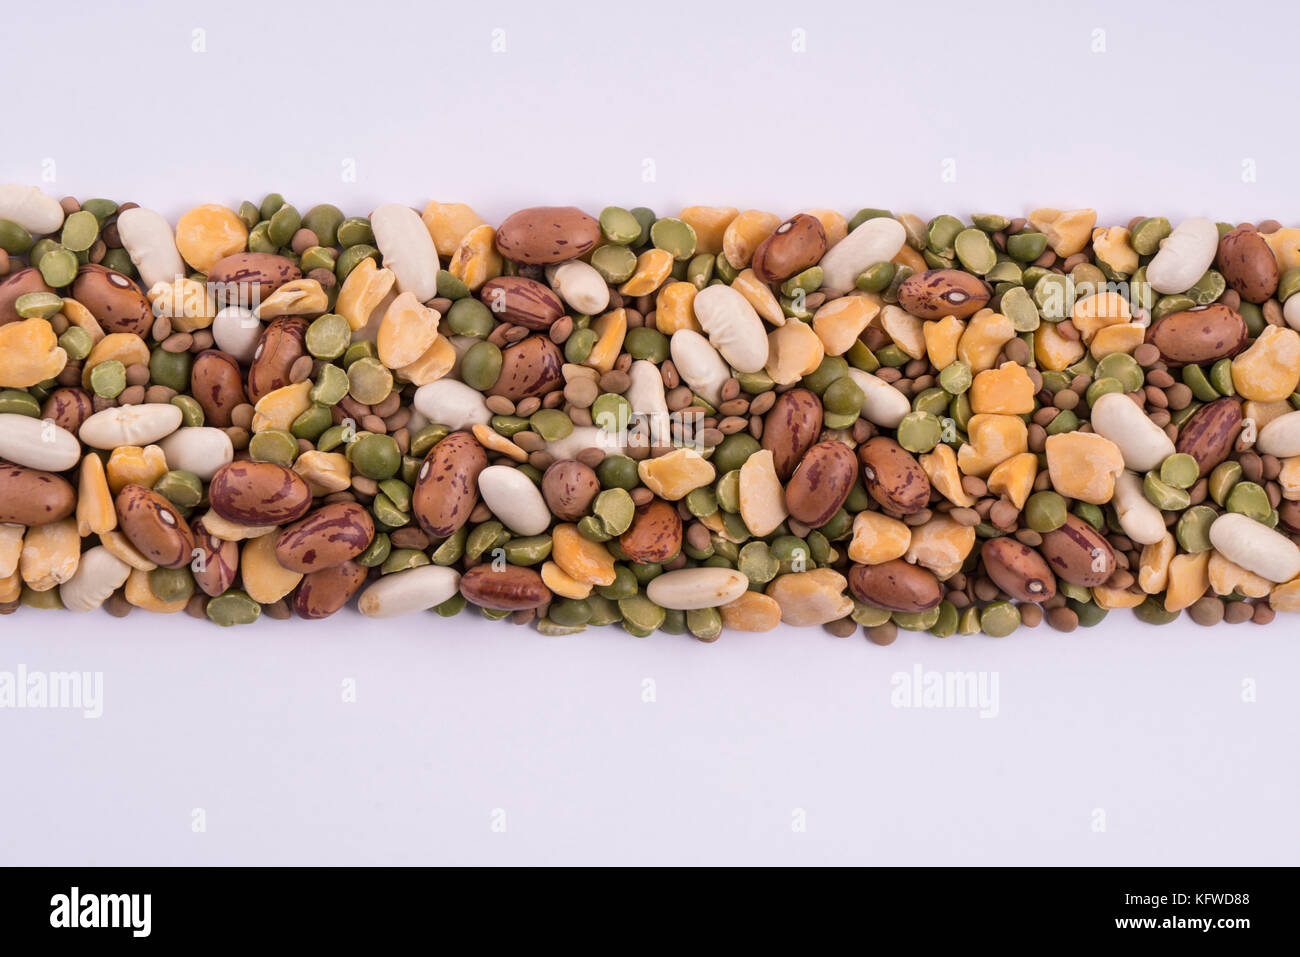 Mixture of dried legumes Stock Photo